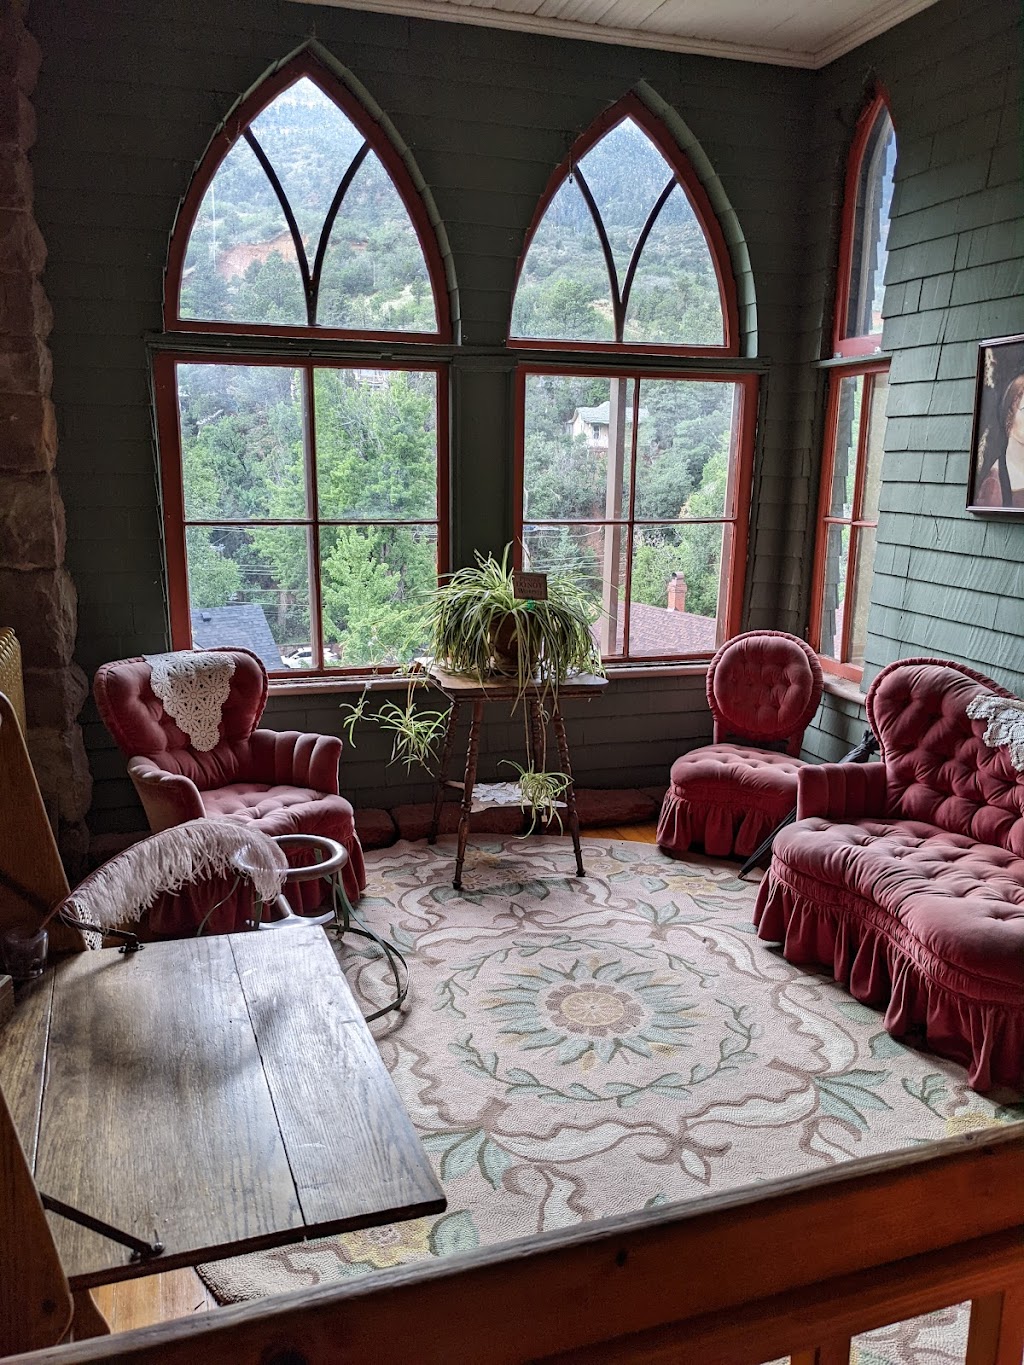 Miramont Castle Museum and The Queens Parlour Tea Room | 9 Capitol Hill Ave, Manitou Springs, CO 80829, USA | Phone: (719) 685-1011